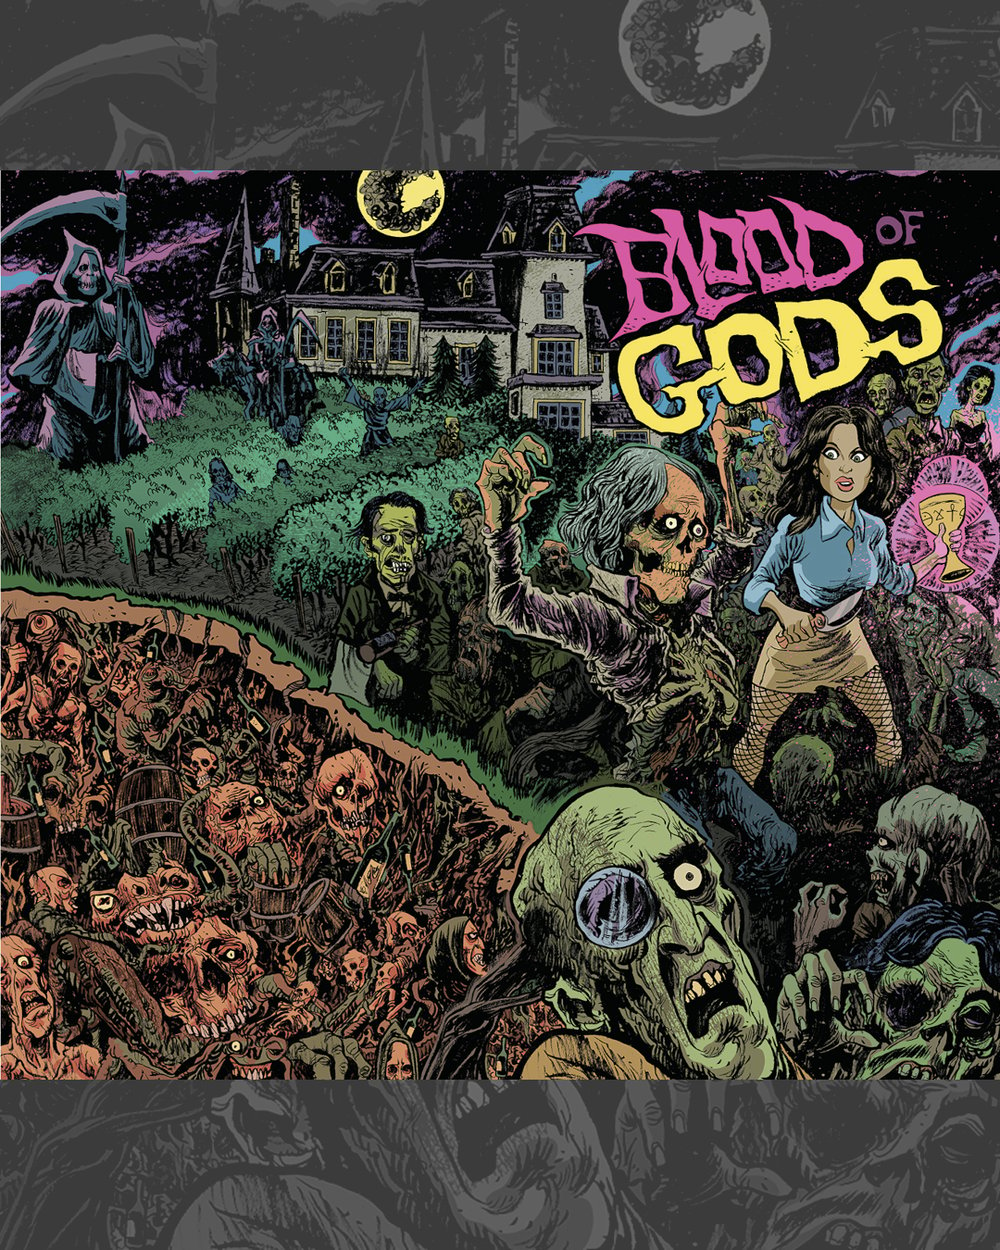 Blood Of Gods #9 - Spring/Summer '24 issue!